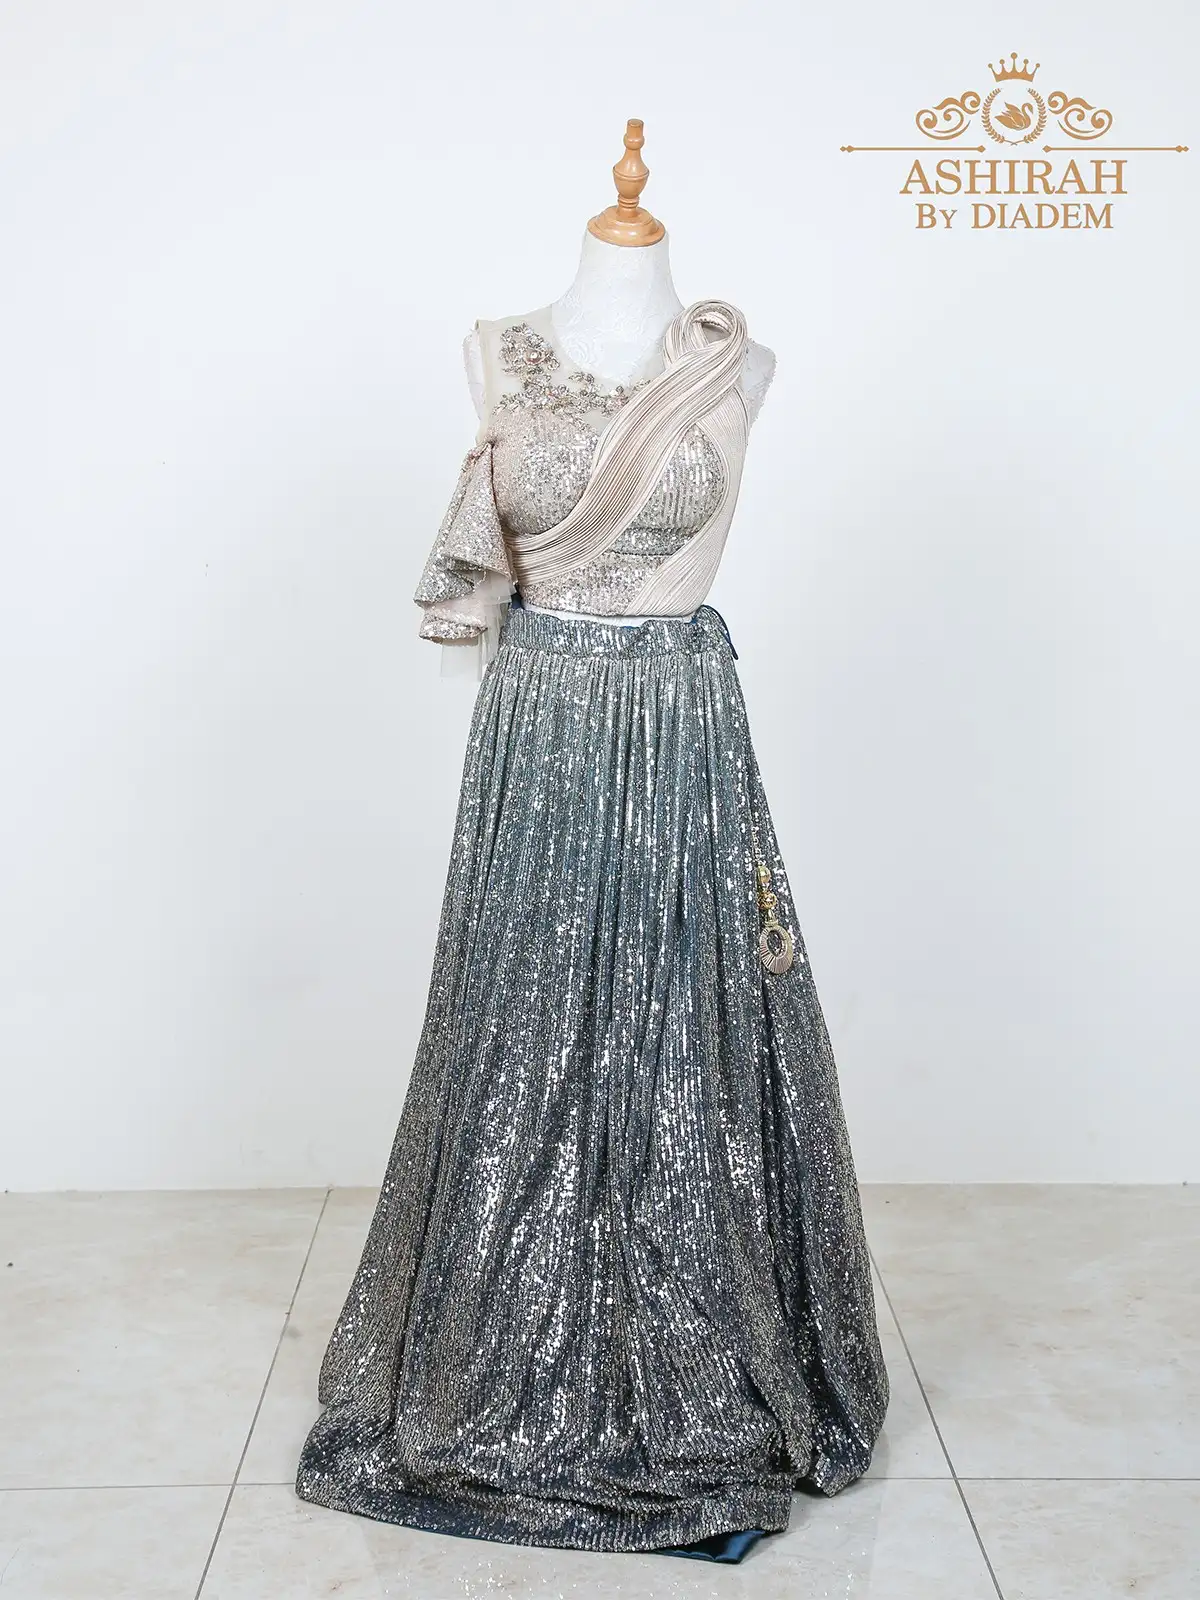 Lehenga and Ruffled Top Embellished with Sequins and Beads